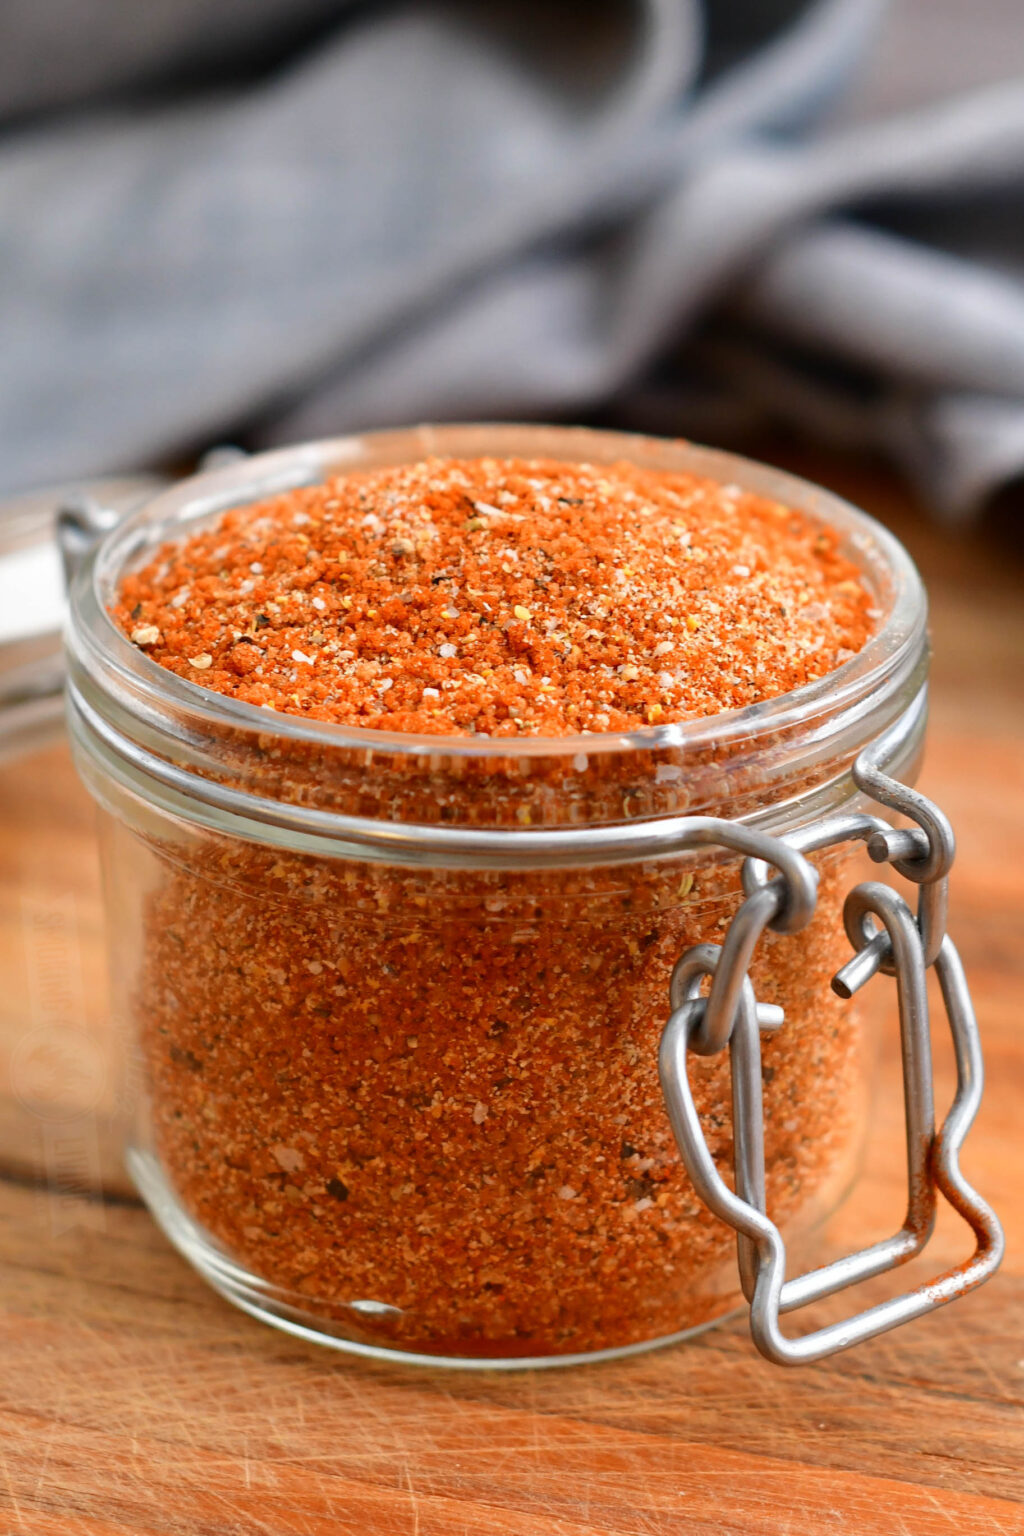 Dry Rub For Ribs - The Best Homemade Dry Rub For Your Ribs